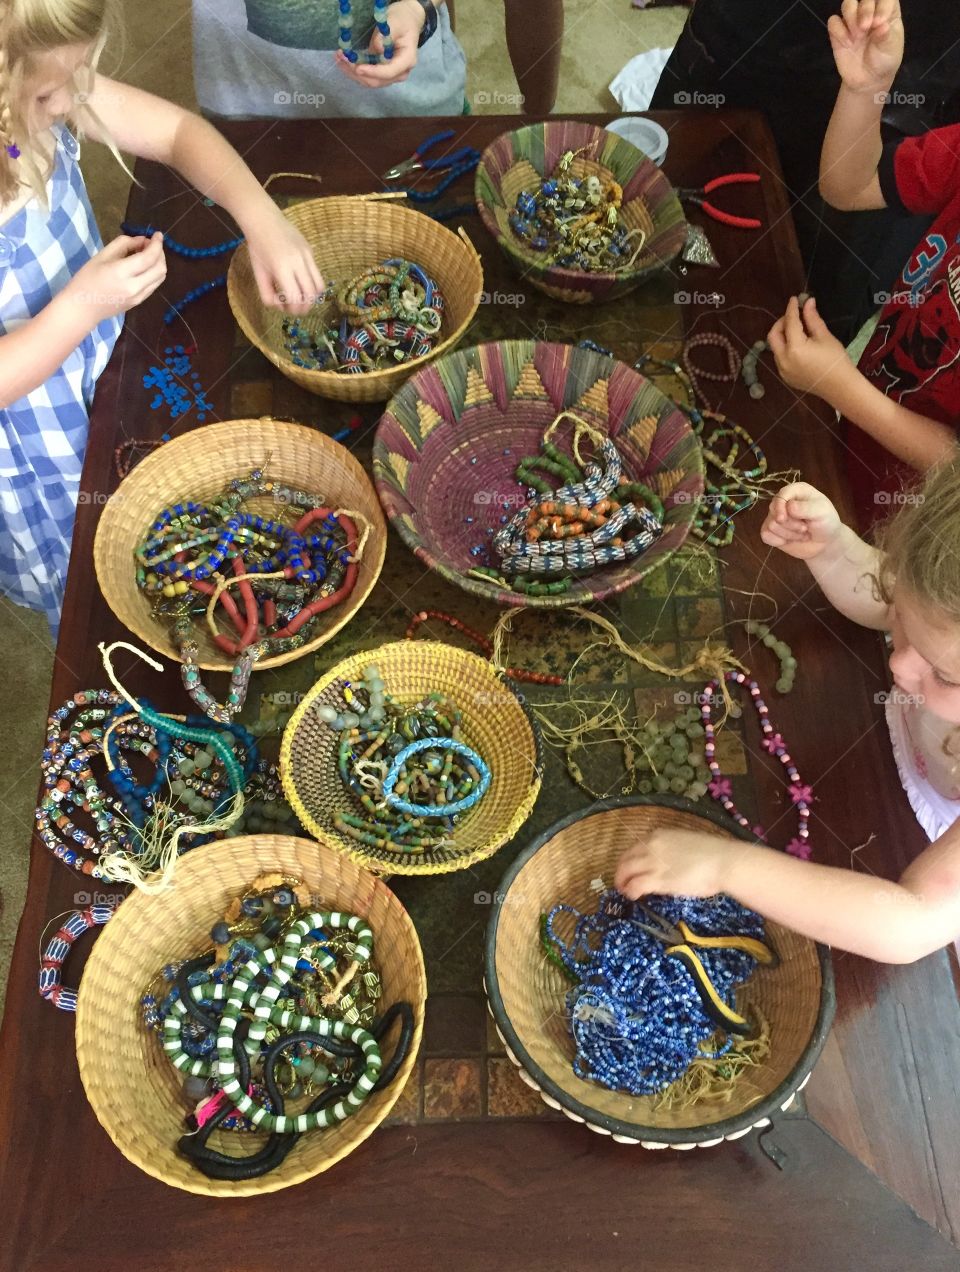 Children making jewellery with beads